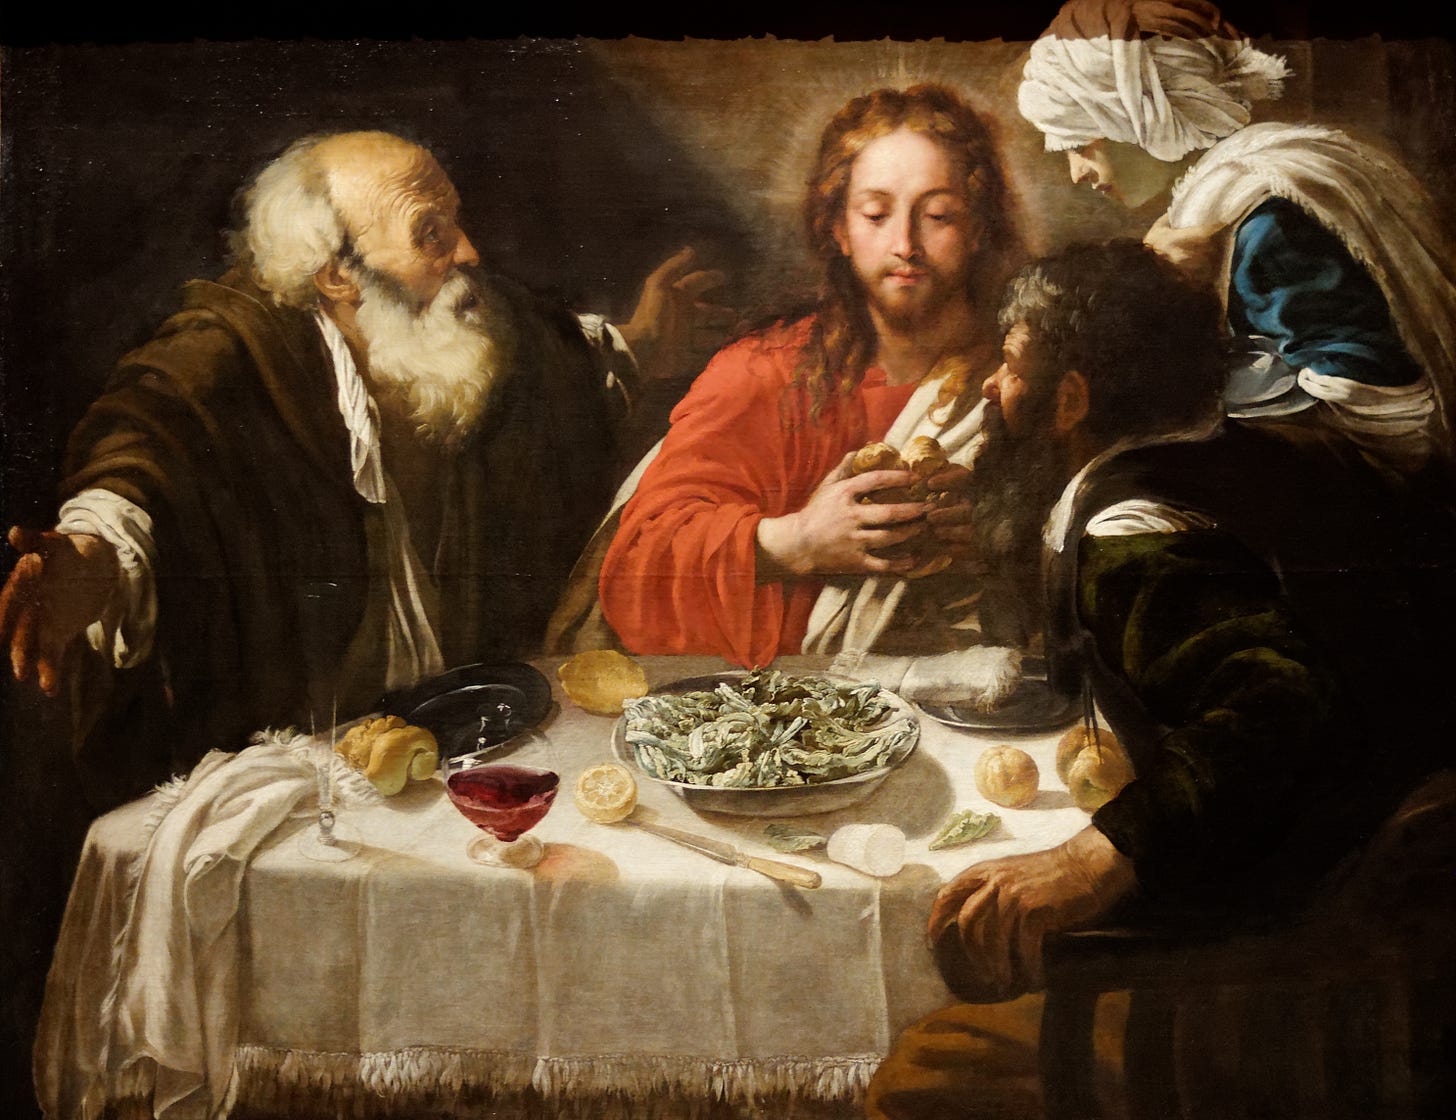 Jesus and His Disciples, a painting by Caravaggio